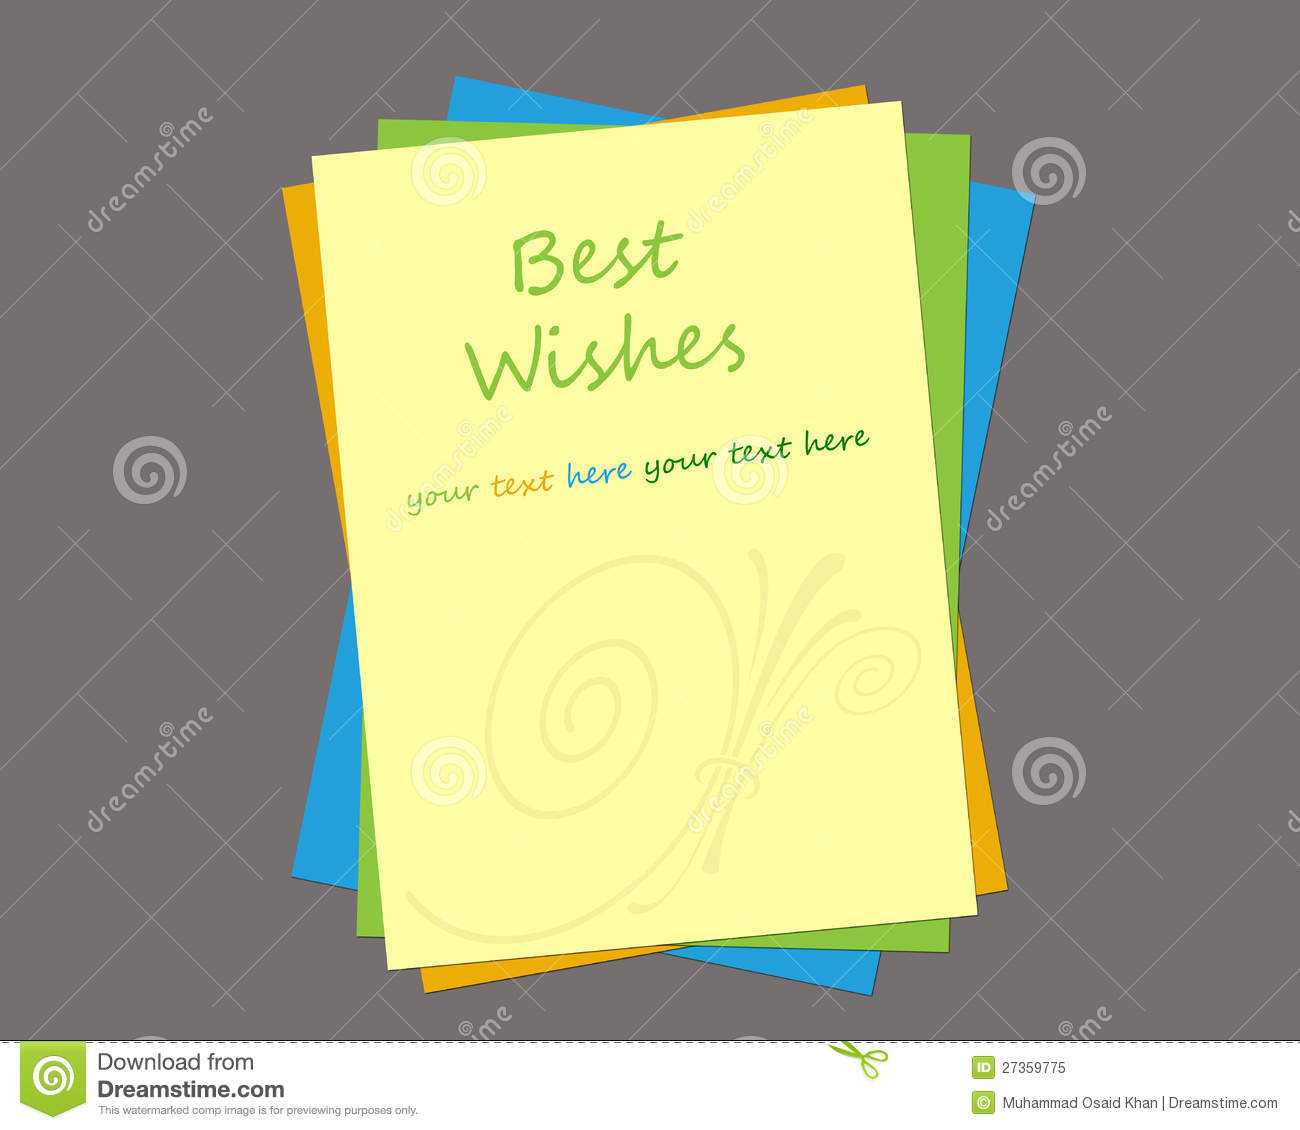 greeting-card-template-stock-illustration-illustration-of-for-free-blank-greeting-card